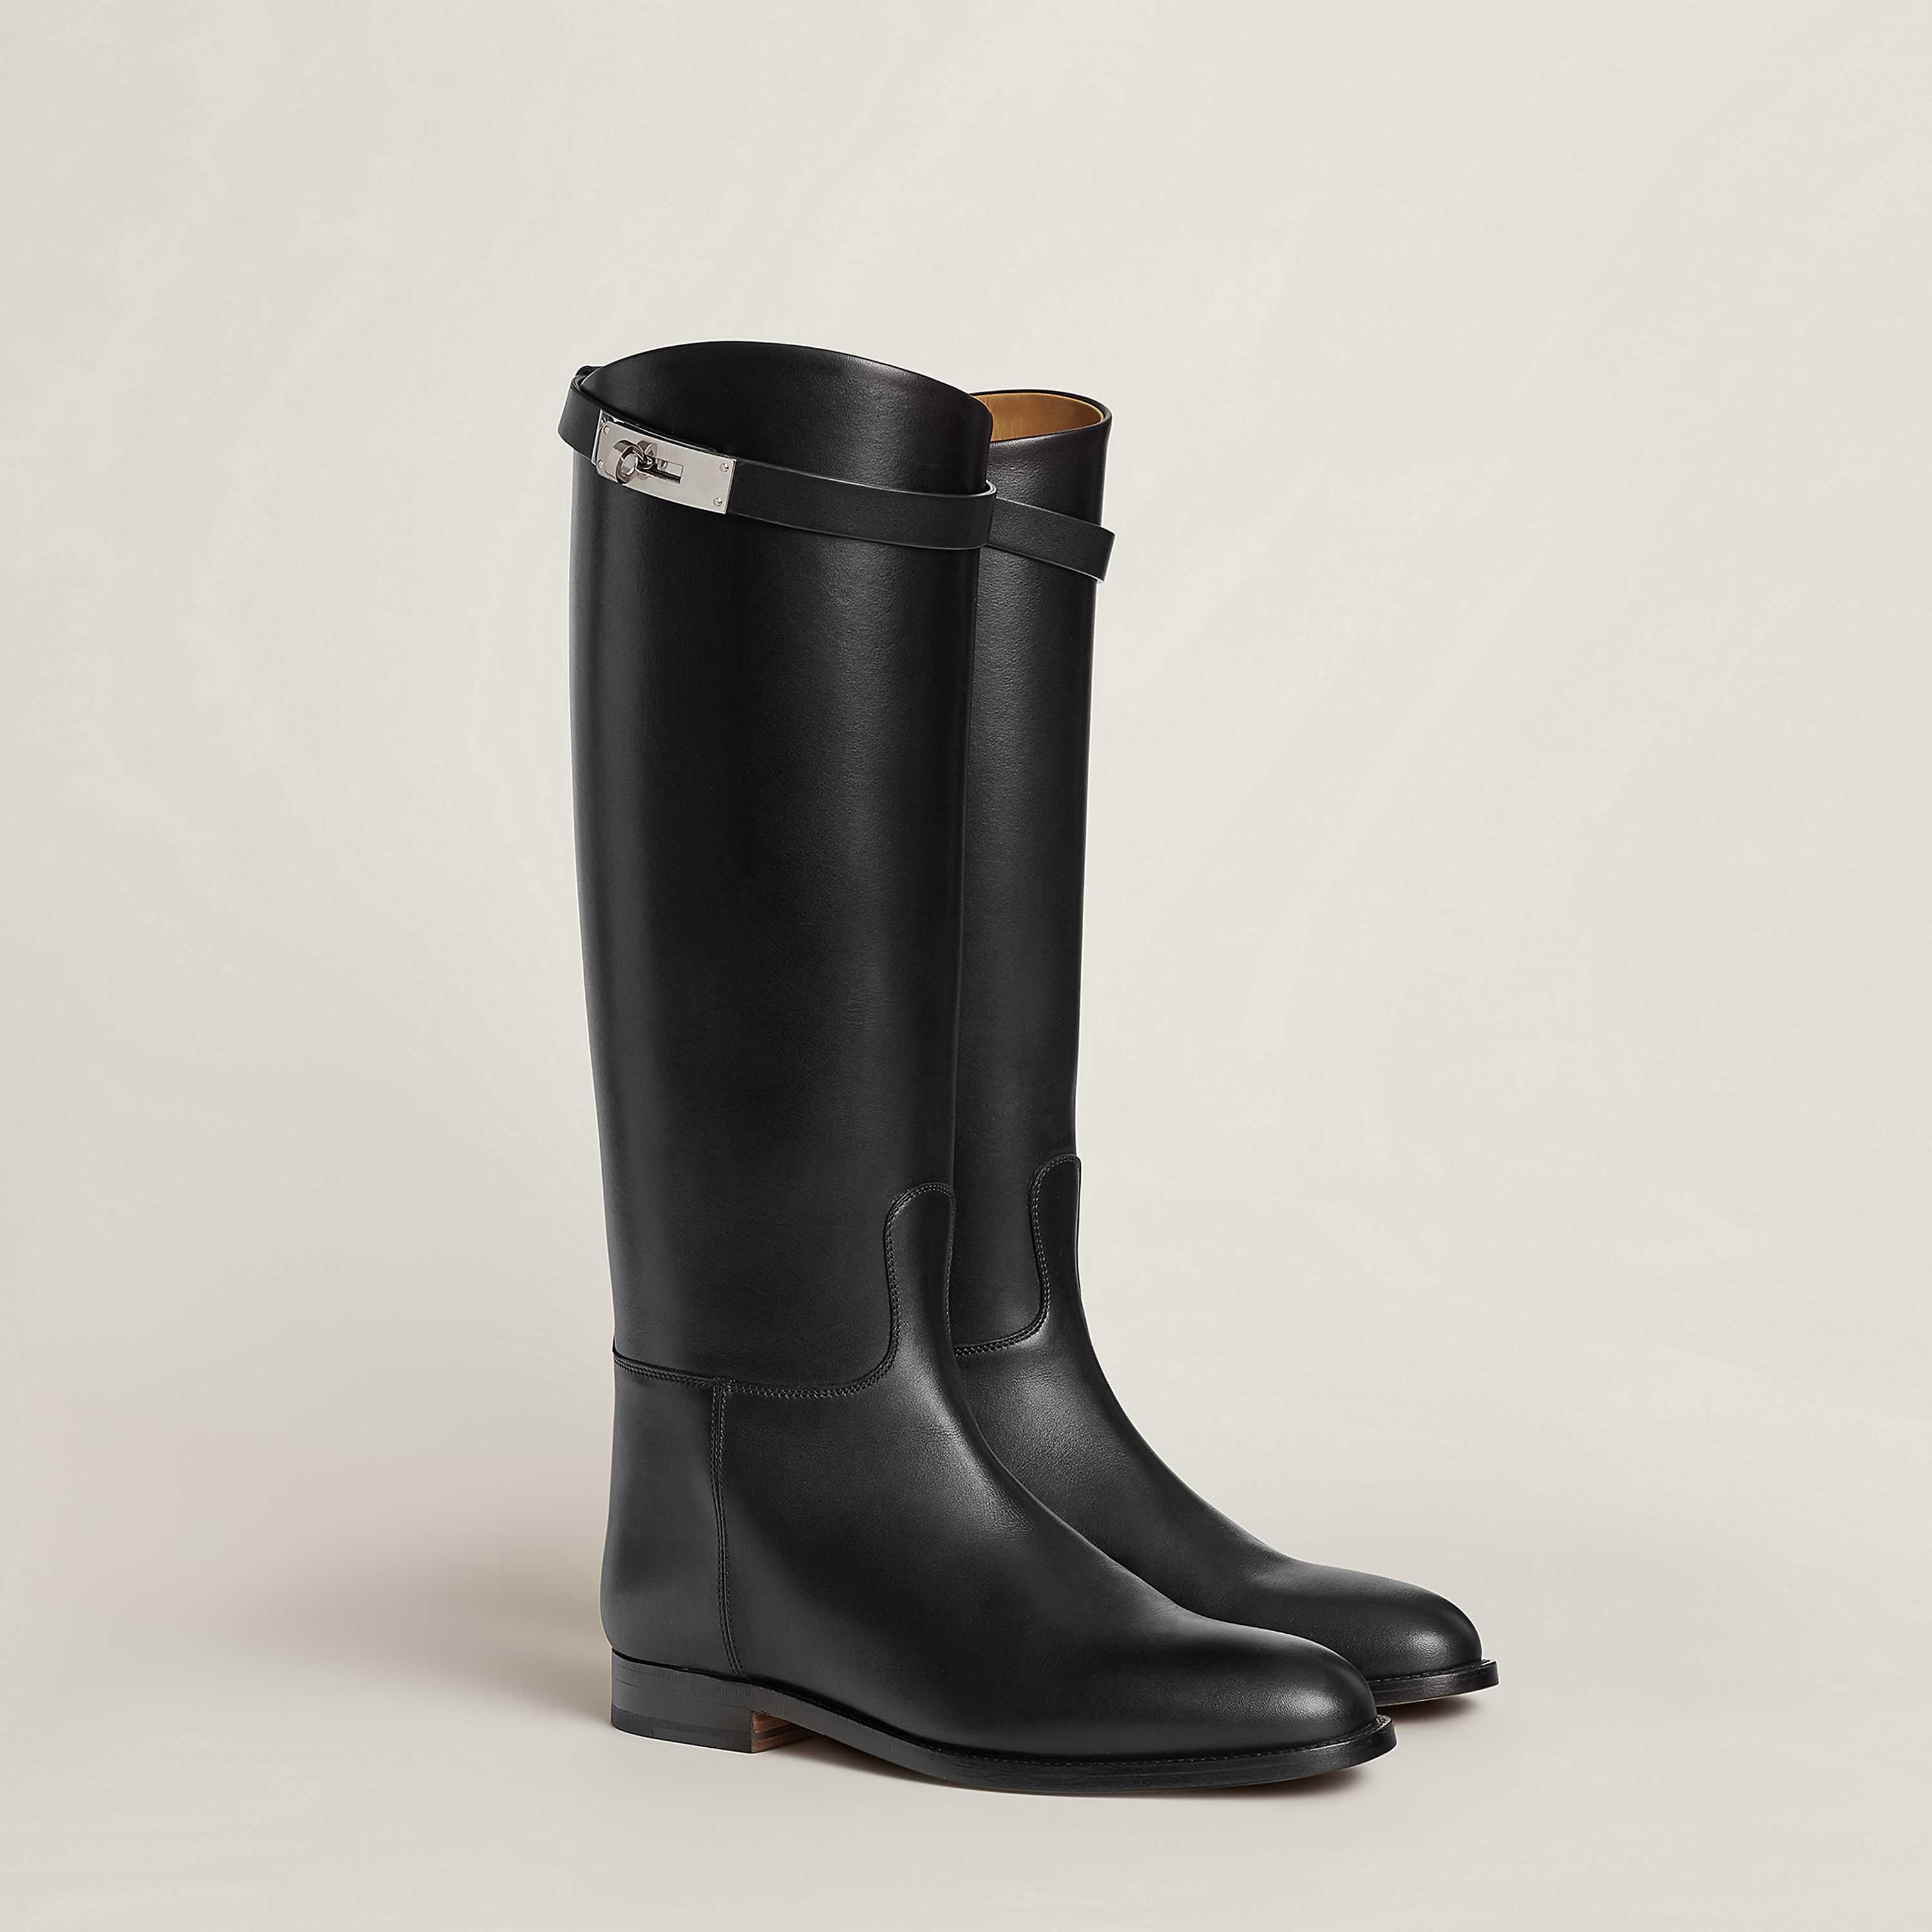 Jumping Boot in Box calfskin with palladium plated Kelly buckle, $2,625. Photo via Hermès.com.